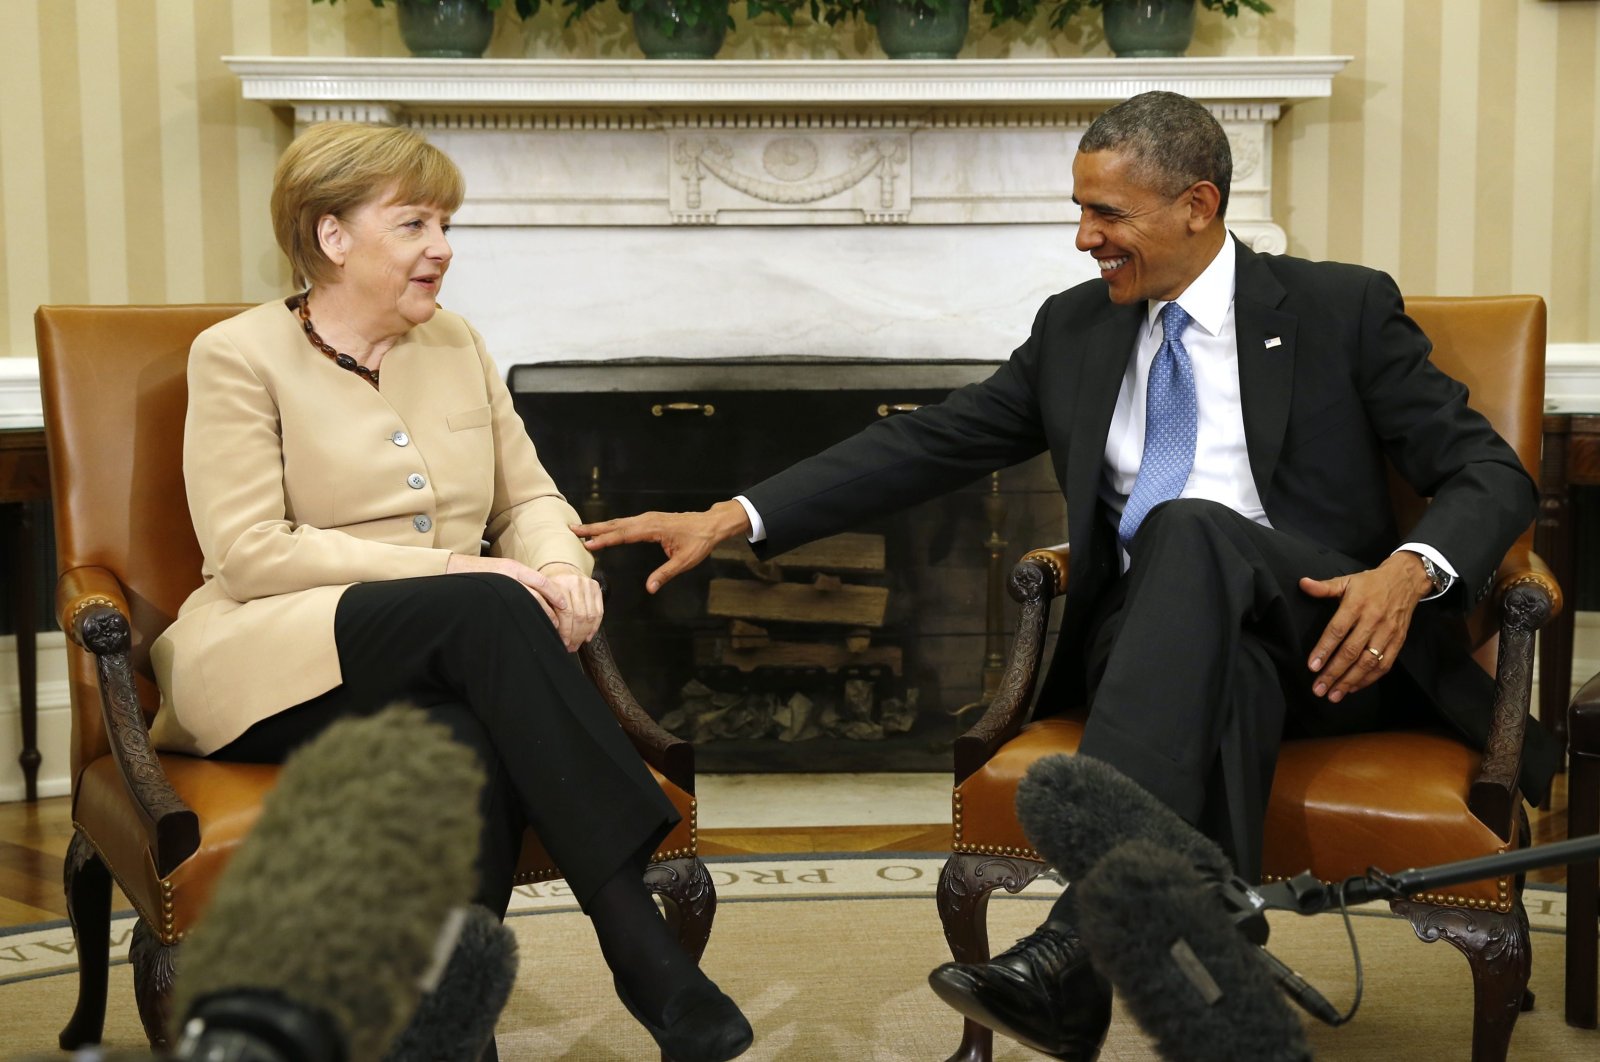 U.S. President Barack Obama (R) meets with German Chancellor Angela Merkel to discuss the Ukraine crisis in the Oval Office of the White House, Washington, the U.S., May 2, 2014. (Reuters Photo)